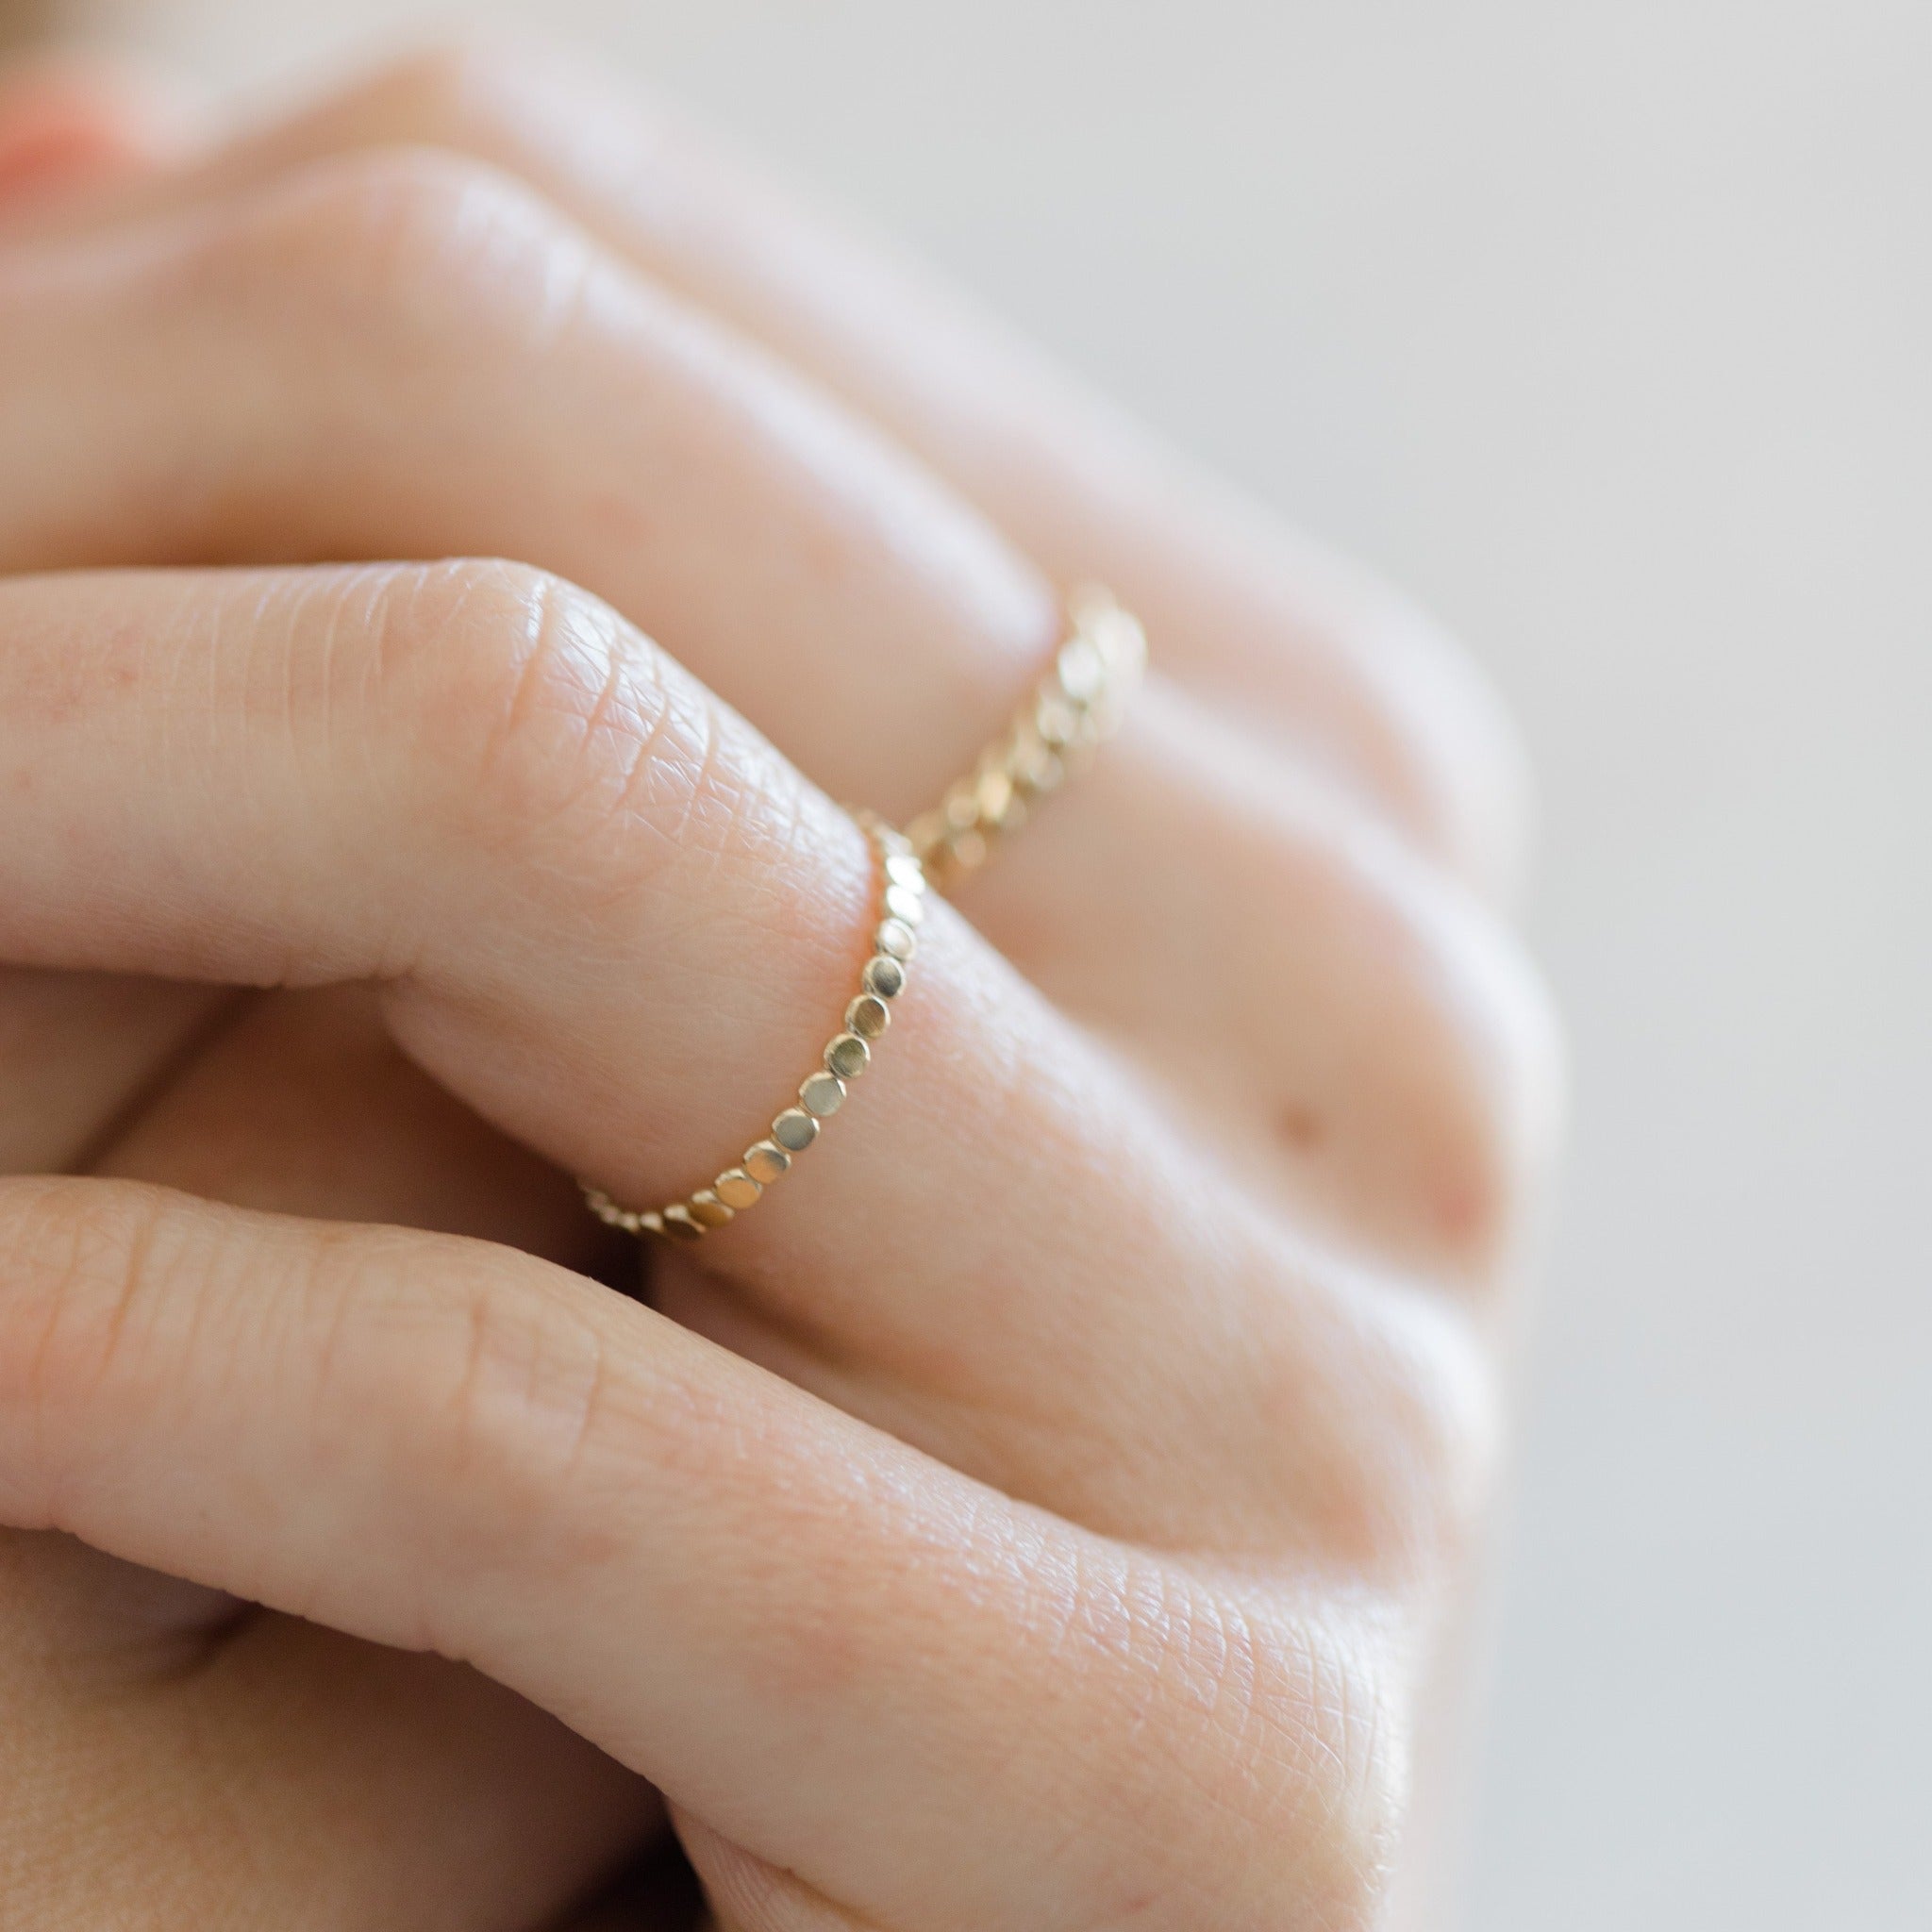 Lightweight gold dot ring made with durable 14k gold filled metal. The dot pattern glimmers in the light.